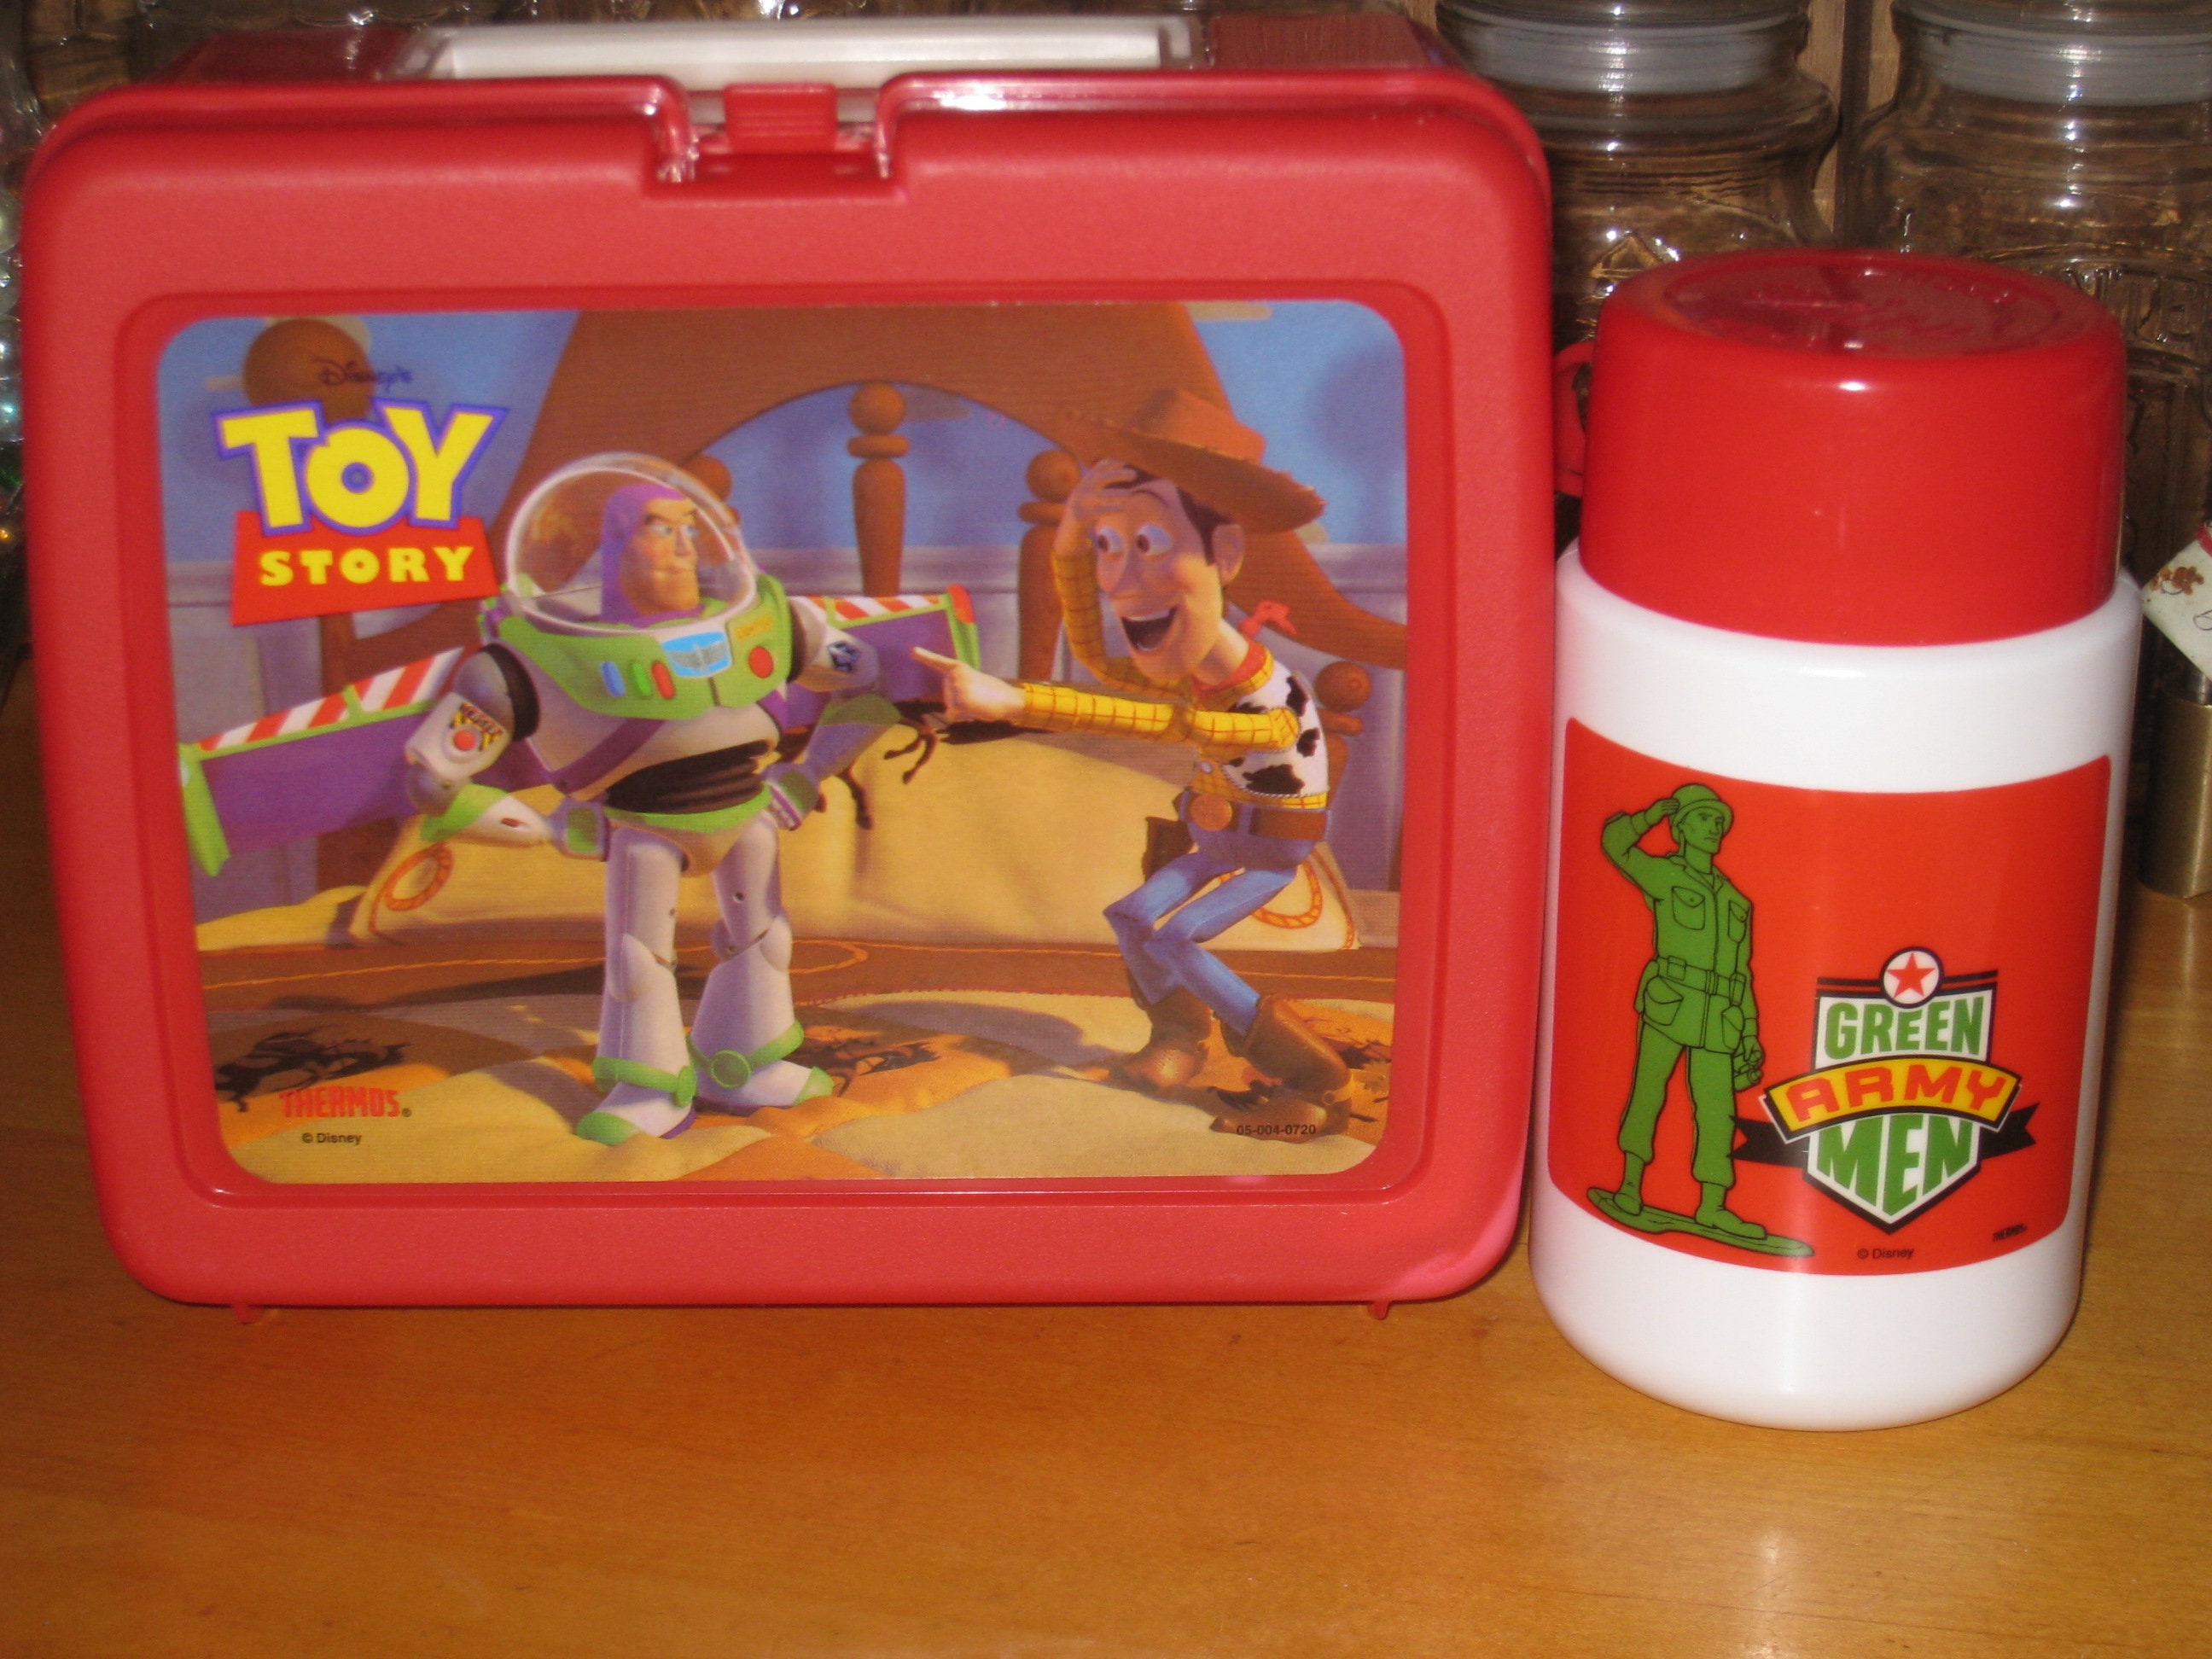 Toy Story Single Compartment Soft Insulated Lunch Bag No Toy Gets Left  Behind with 3-D Image of Buzz Lightyear, Woody, Rex, Bullseye and Slinky Dog